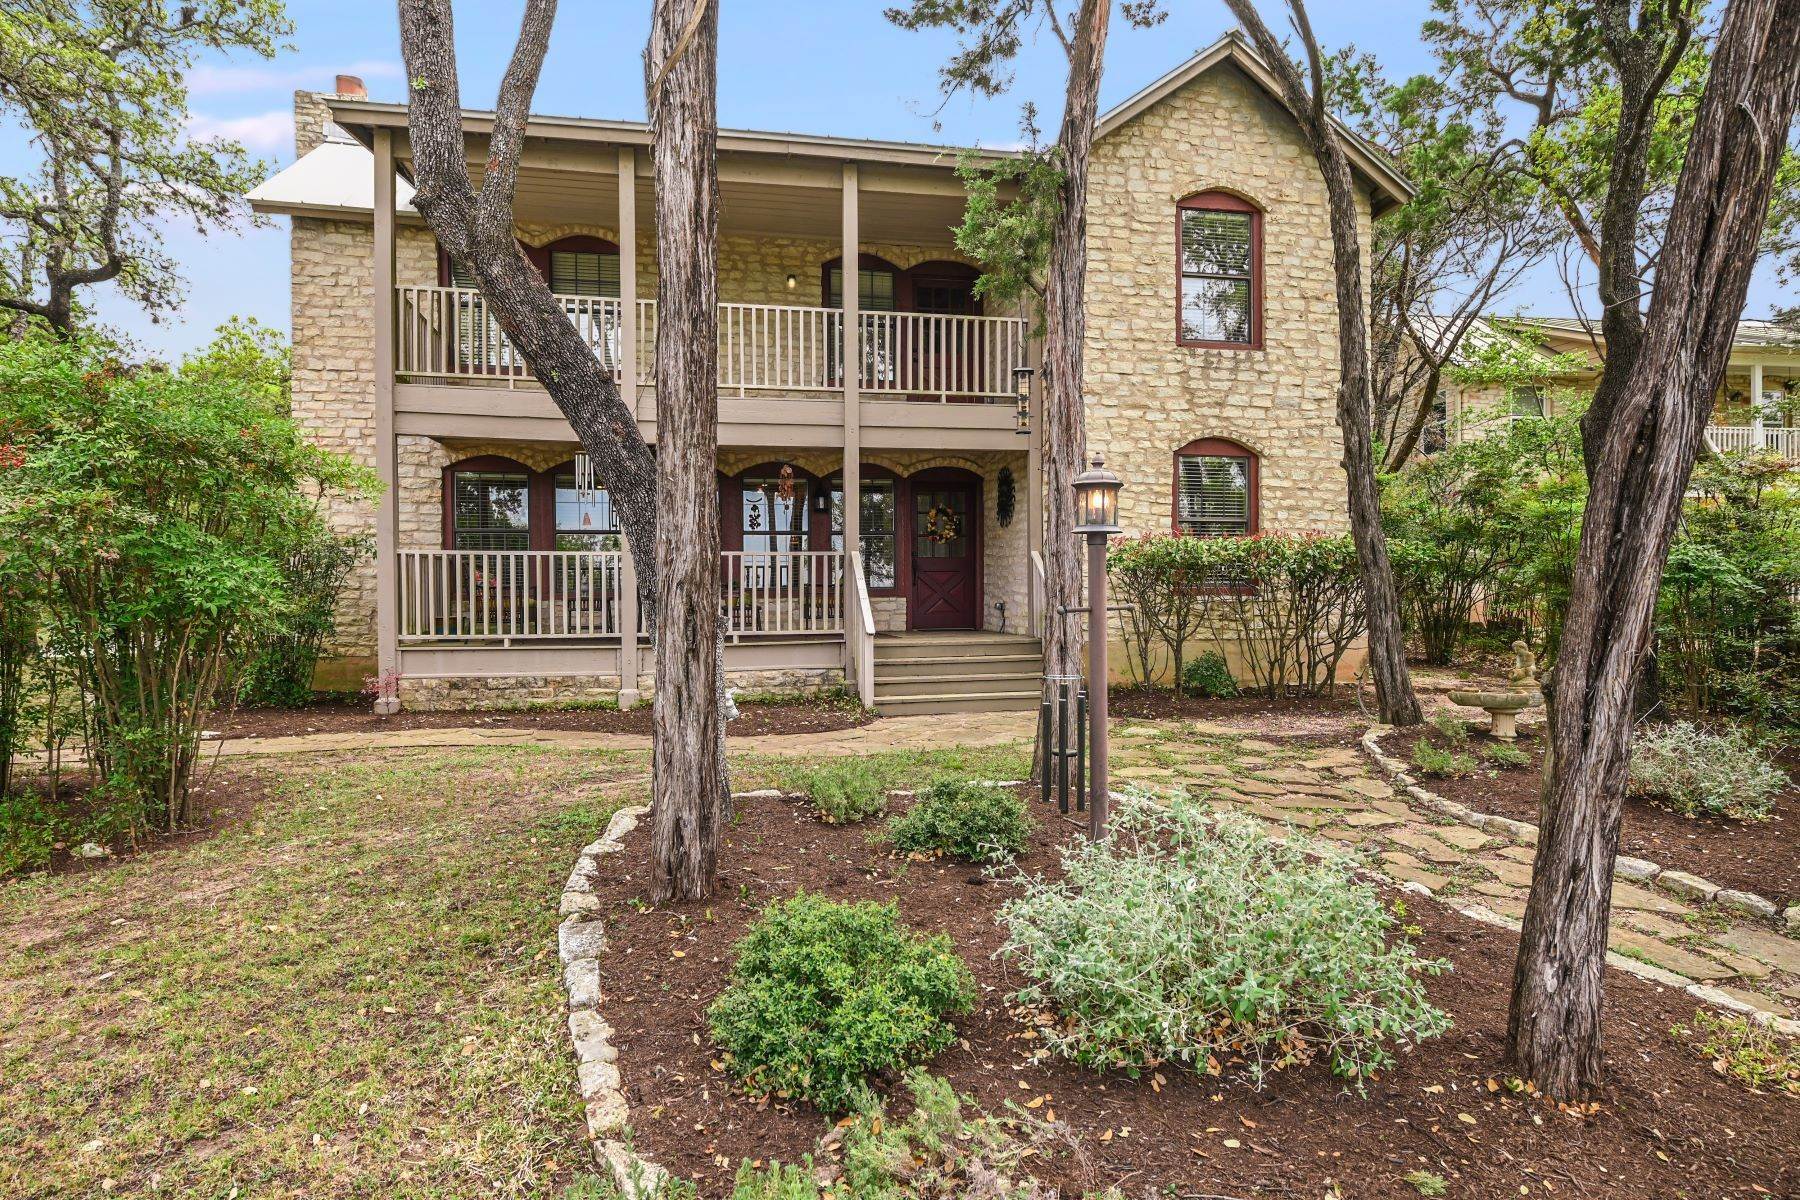 Property for Sale at 8450 Spicewood Springs Road, Austin, TX 78759 8450 Spicewood Springs Road Austin, Texas 78759 United States